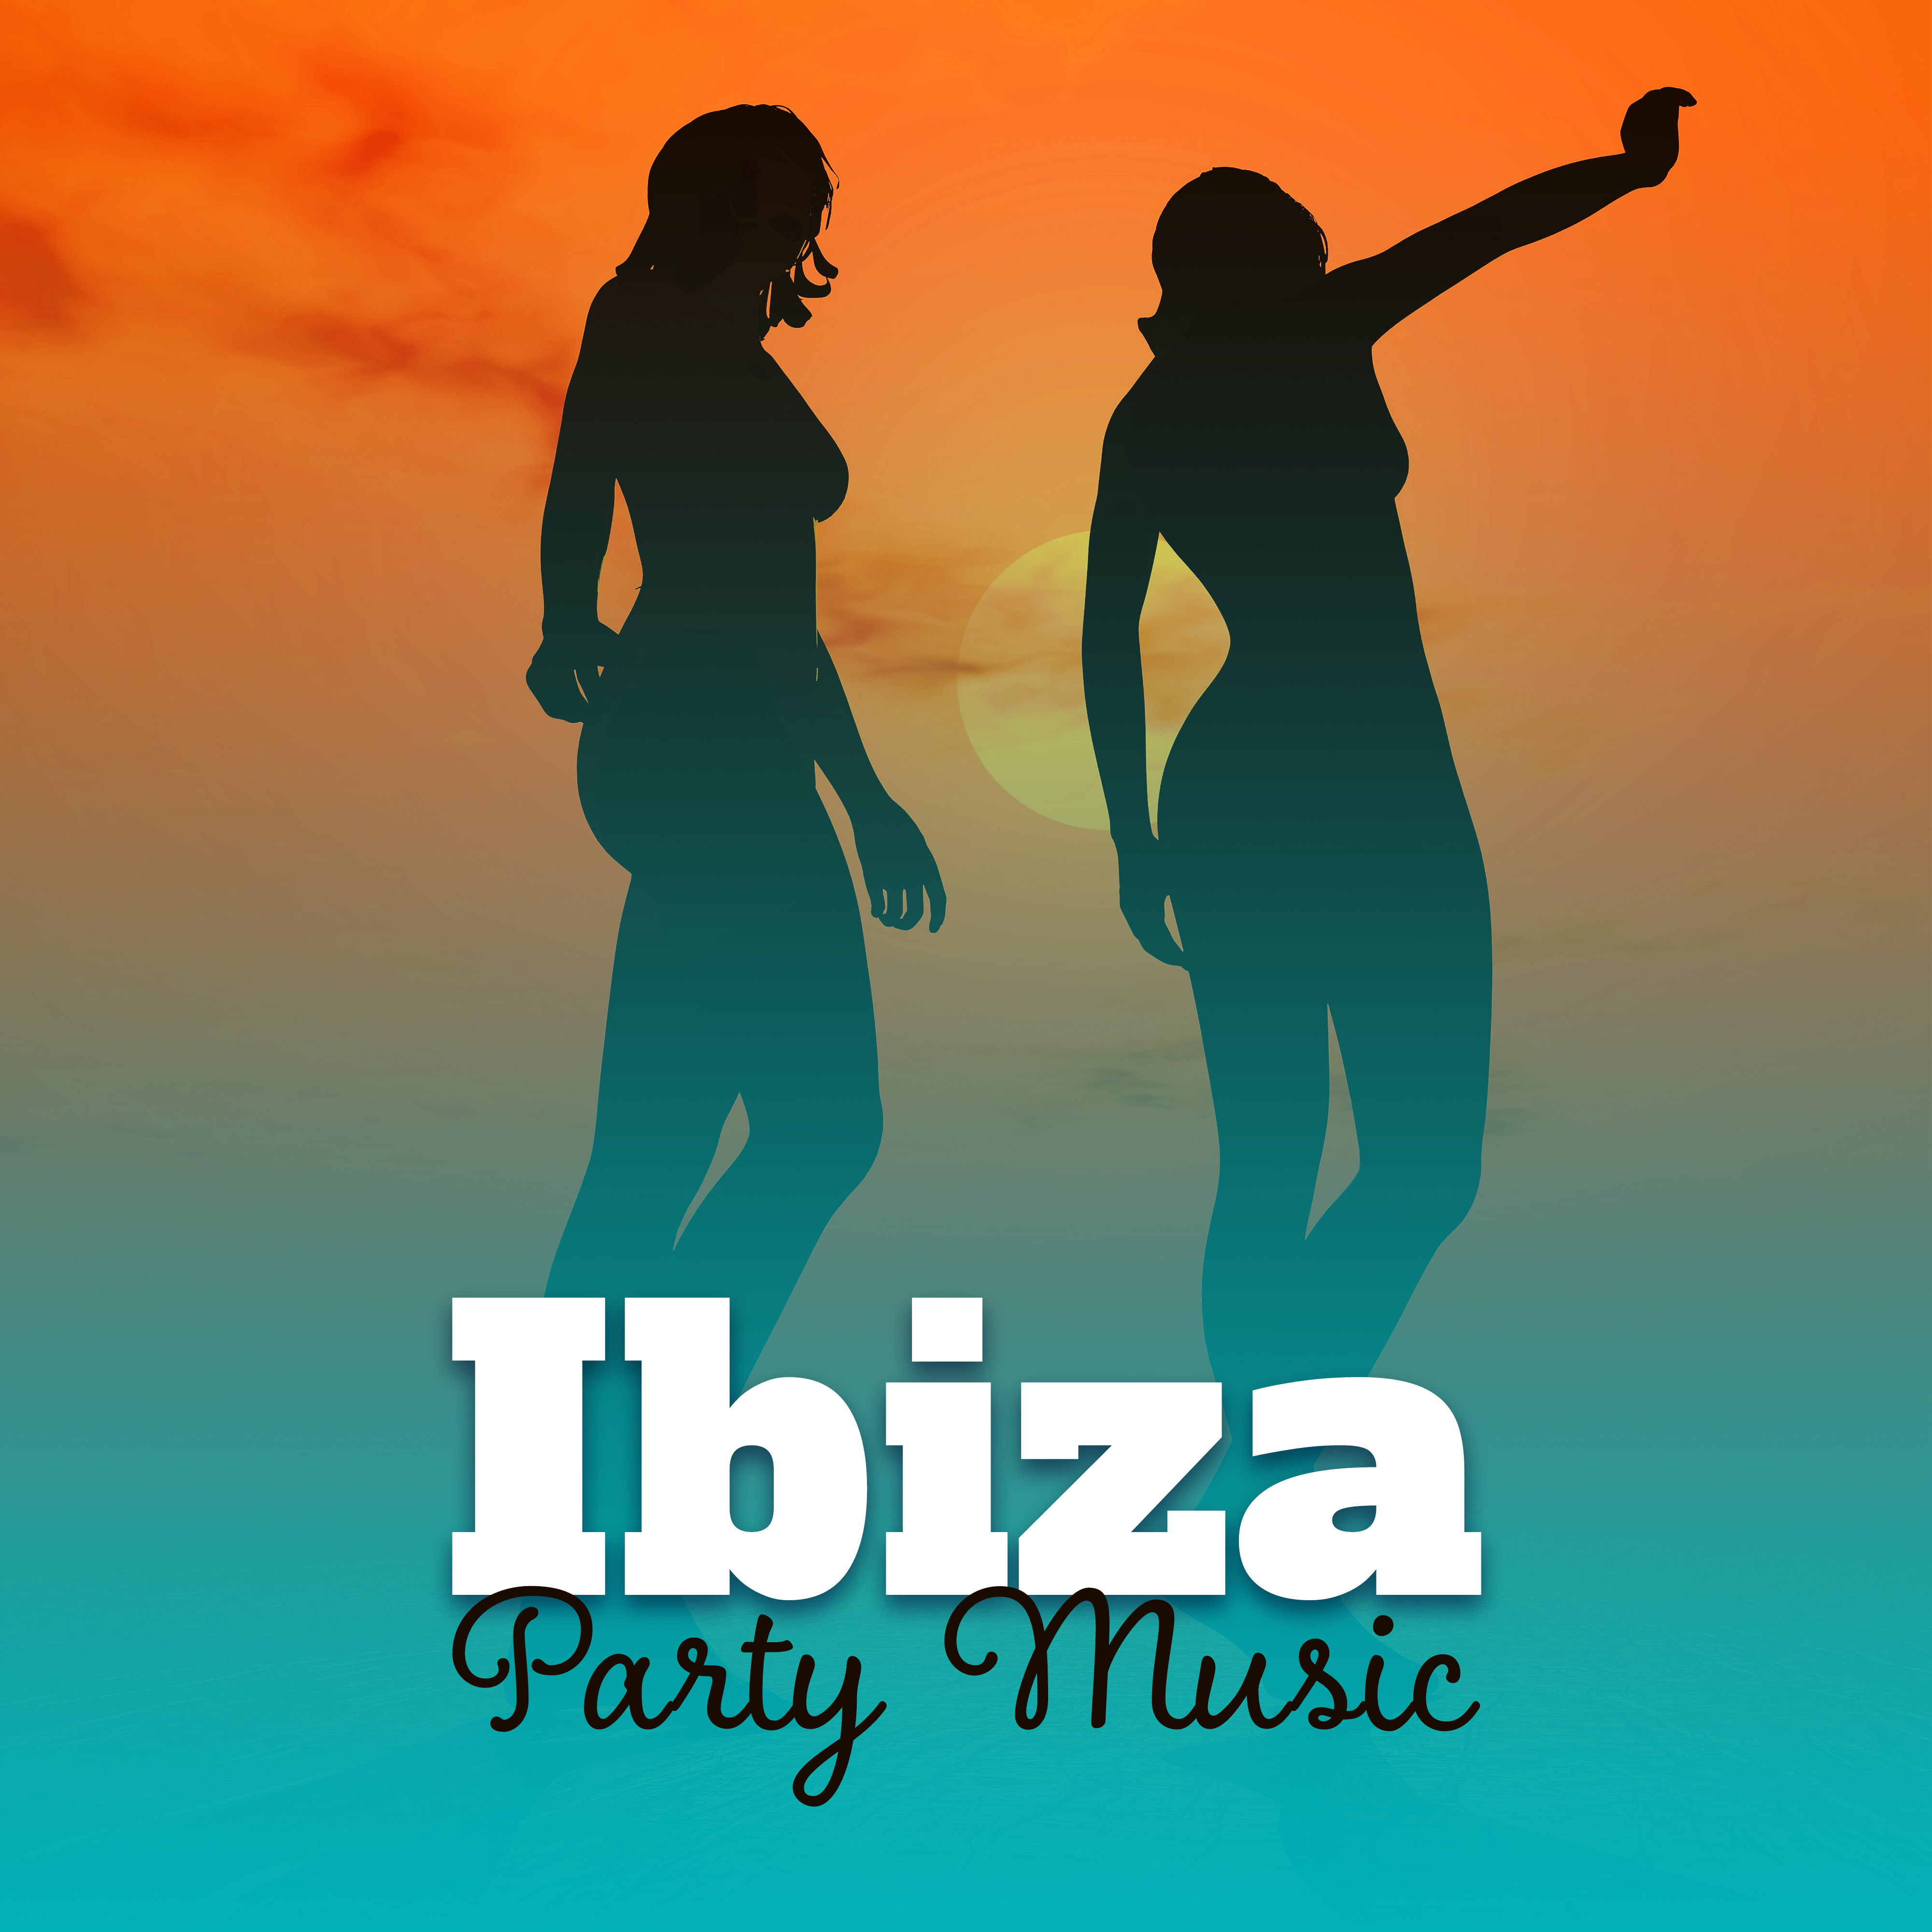 Ibiza Party Music  Summer Chill Out, Party Time, Holiday Dance, Ibiza Night, Hot Beach Music